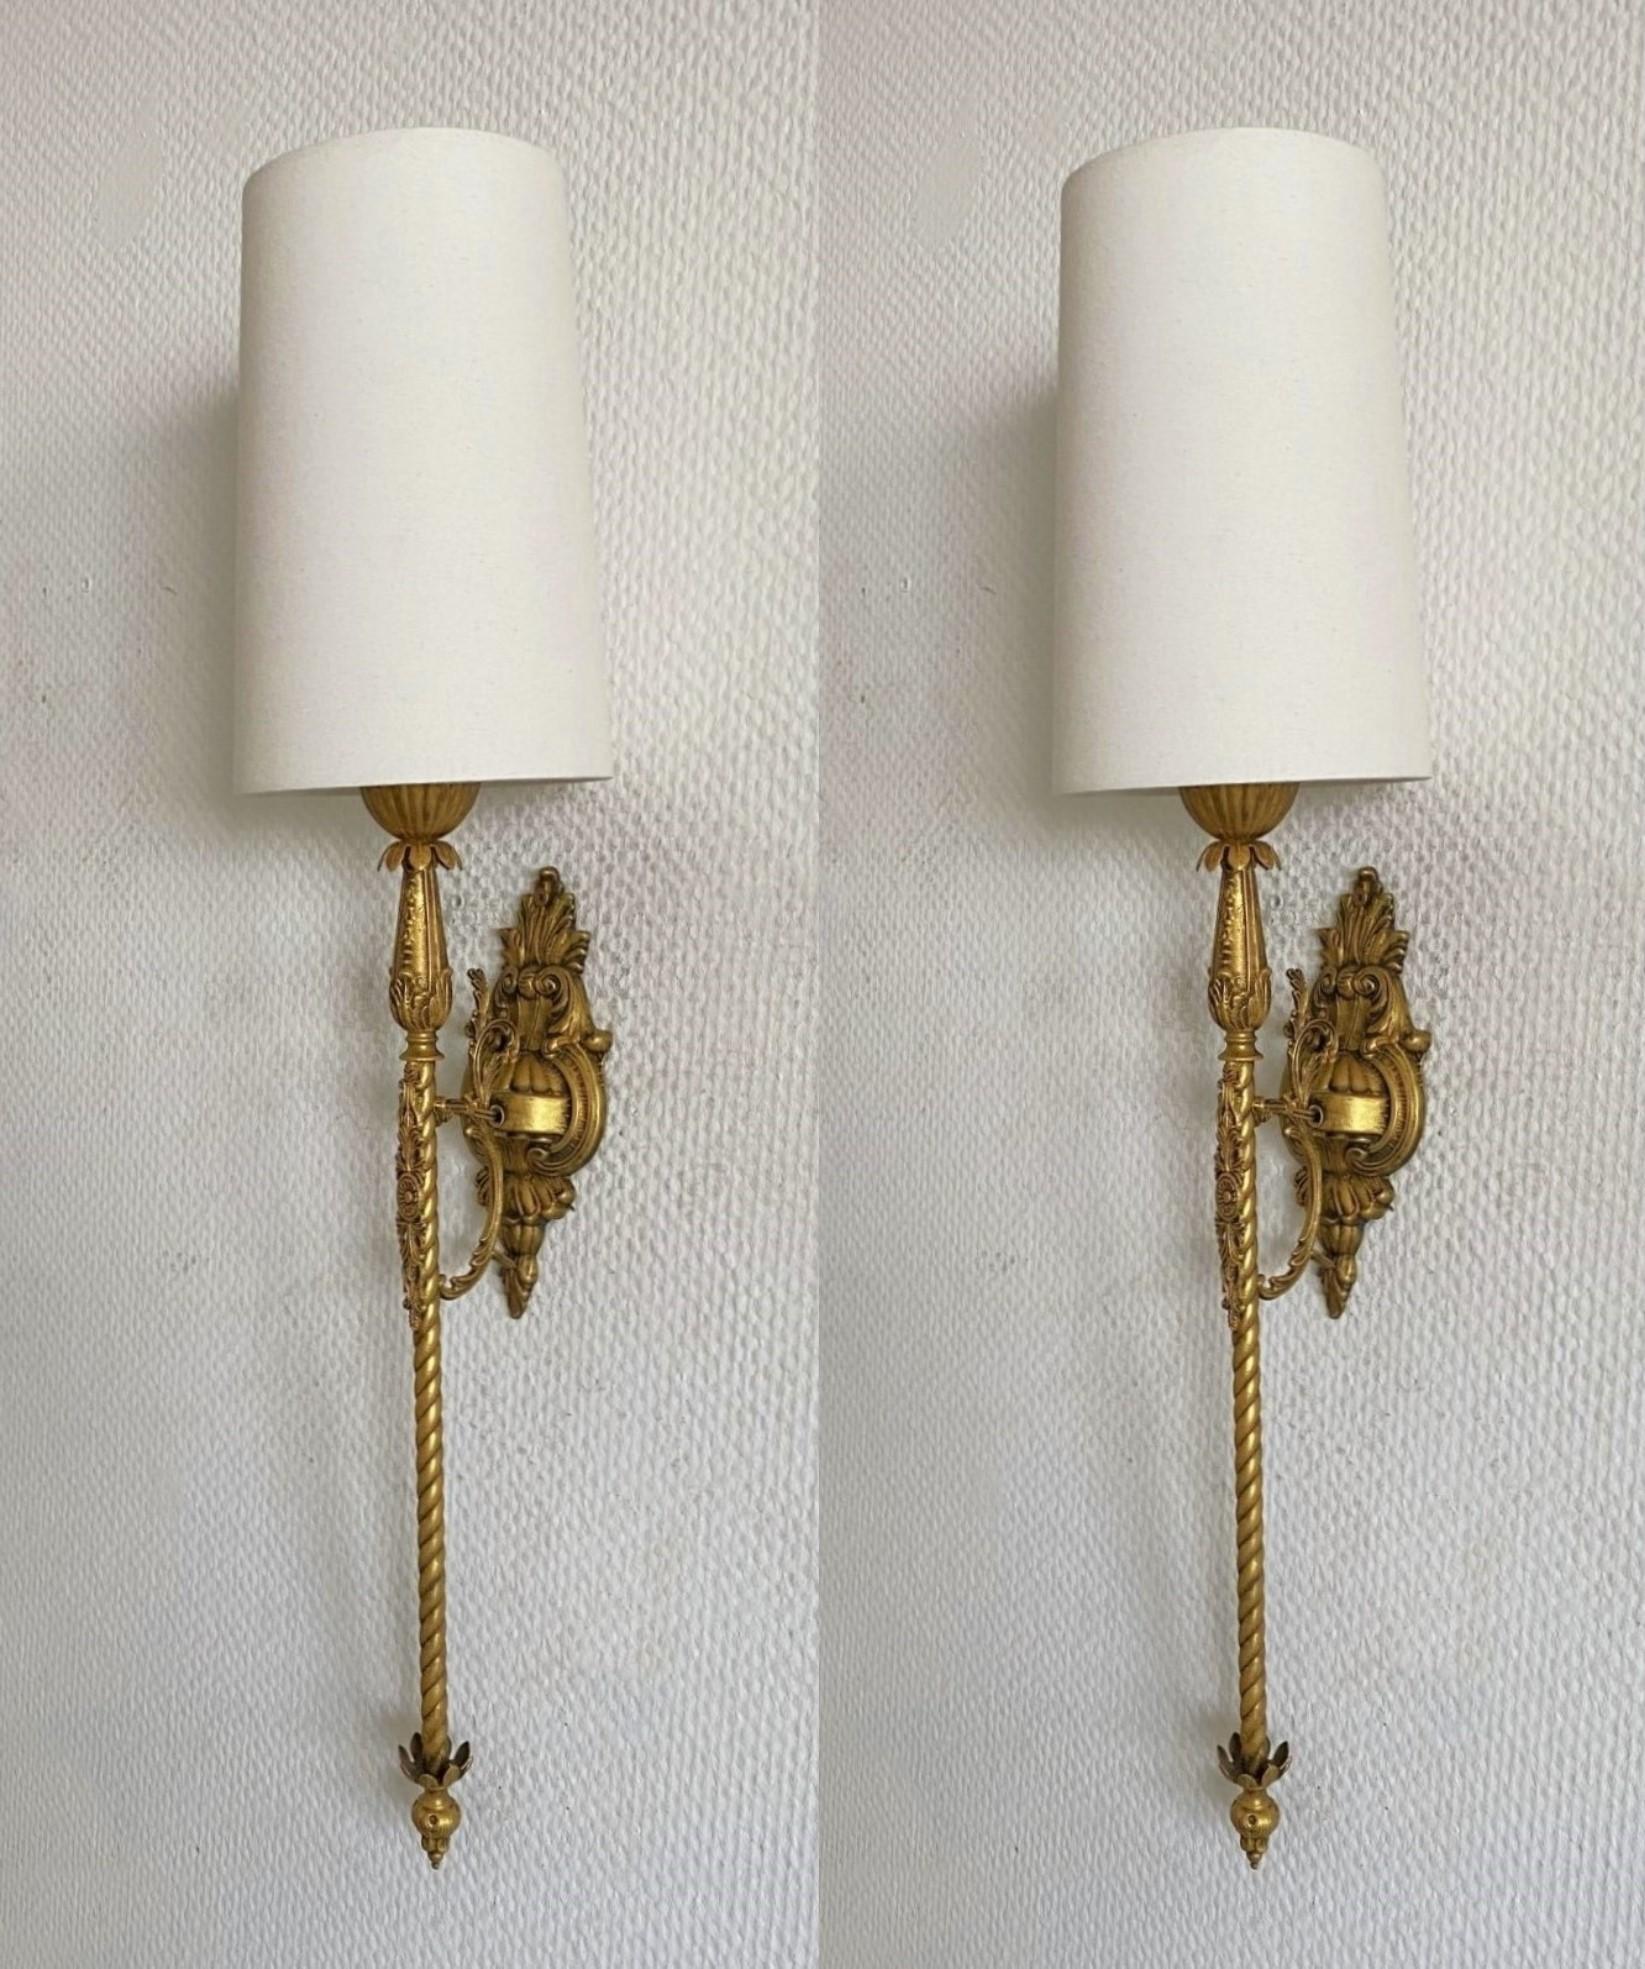 Mid-20th Century Pair of French Tall Art Deco Bronze Torchiere Wall Sconces, 1930s For Sale